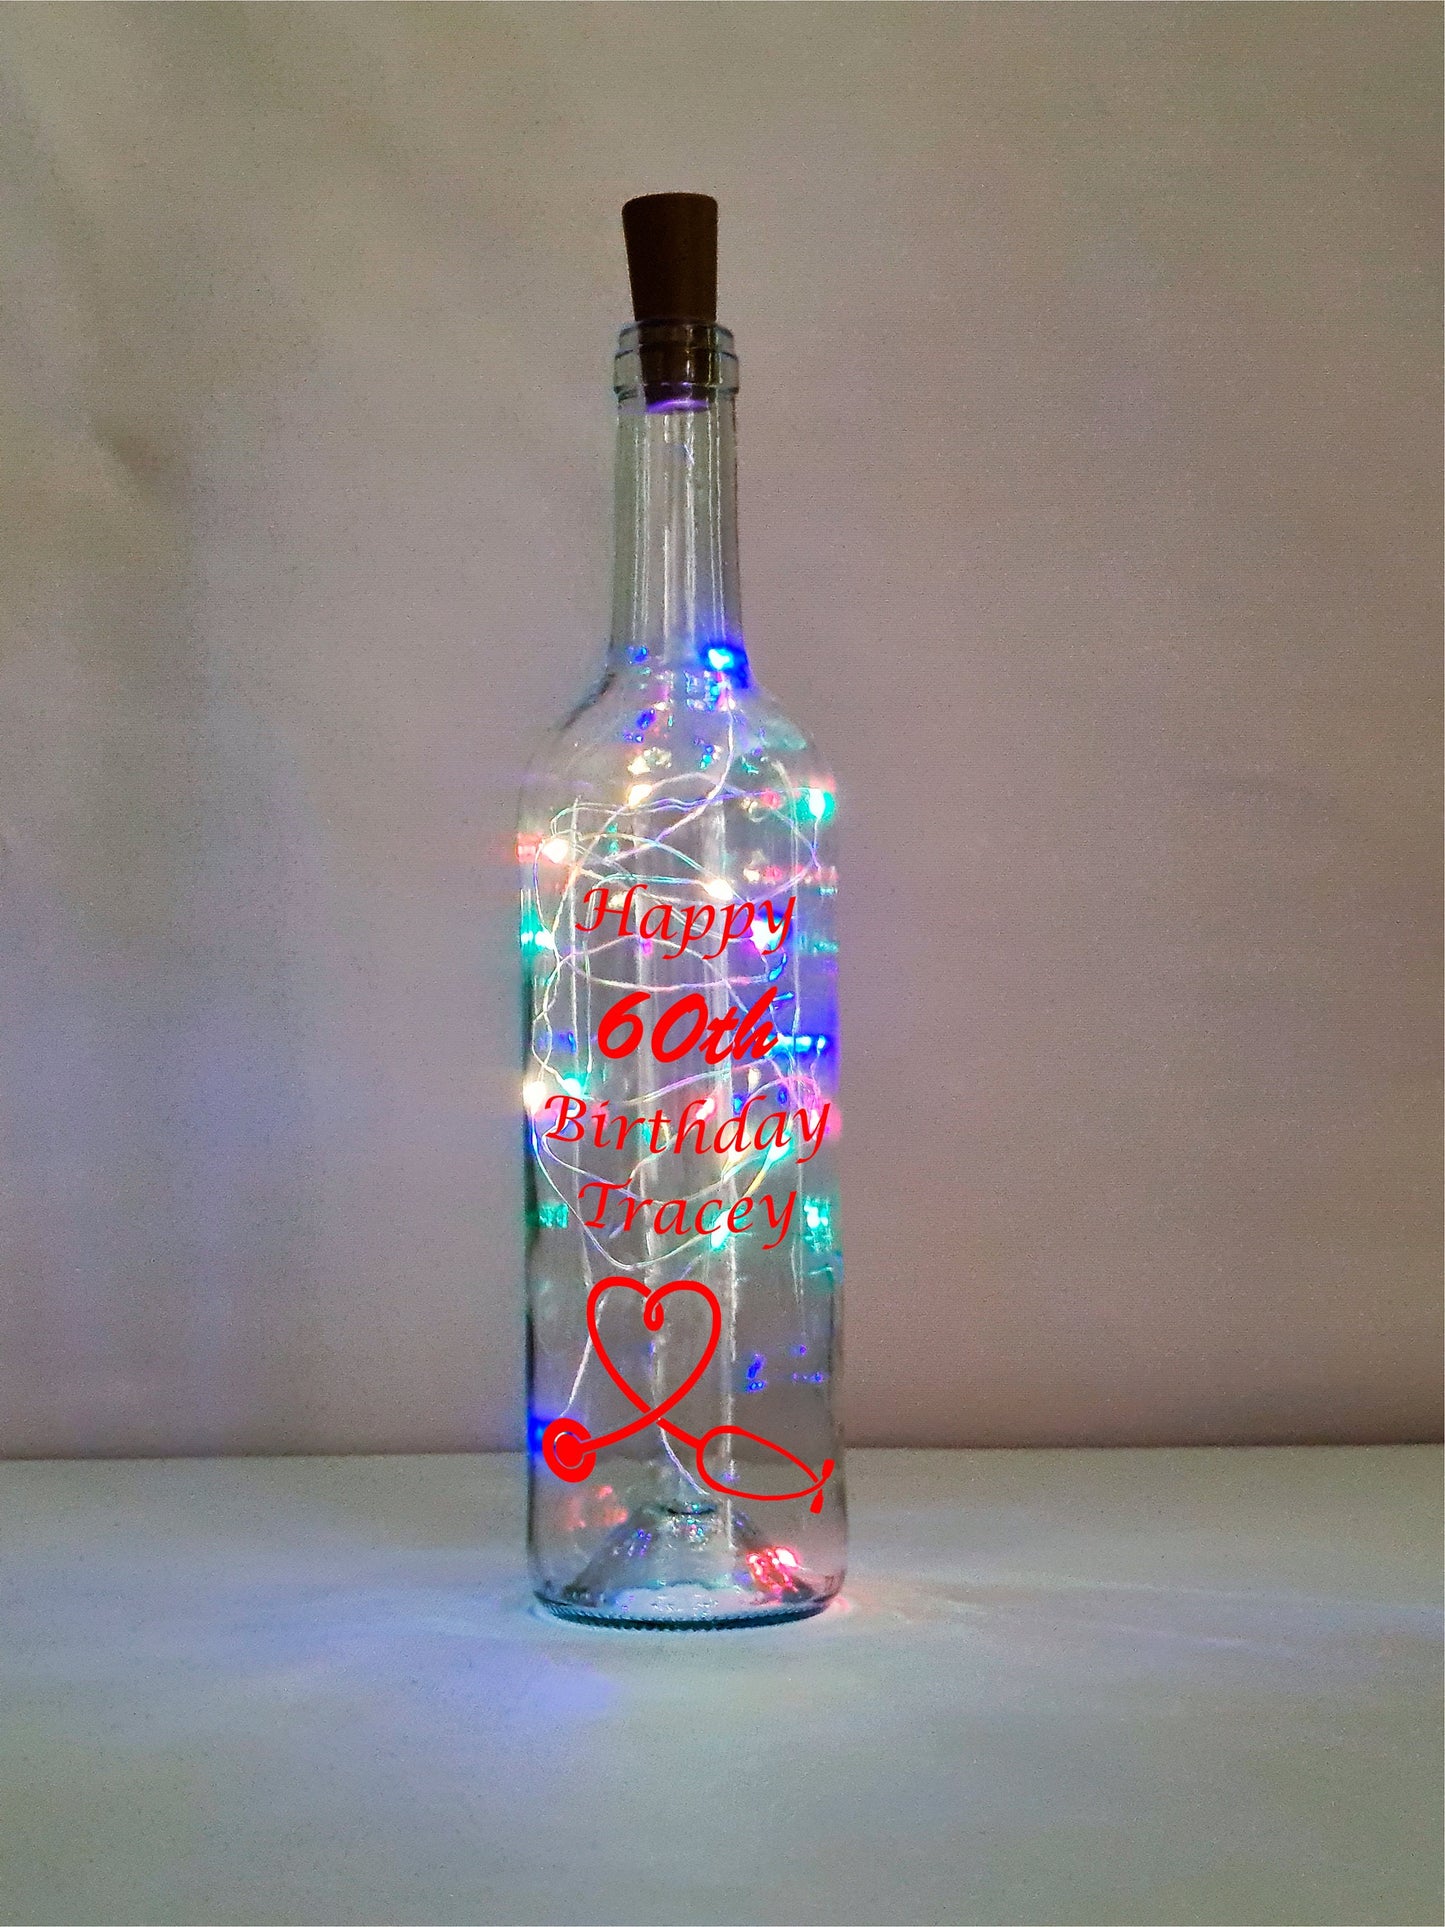 Personalised 60th Birthday Gift For Nurse, Light Up Wine Bottle, Engraved Happy Birthday, Mums Gift, Best Friend Gift, Present For Her